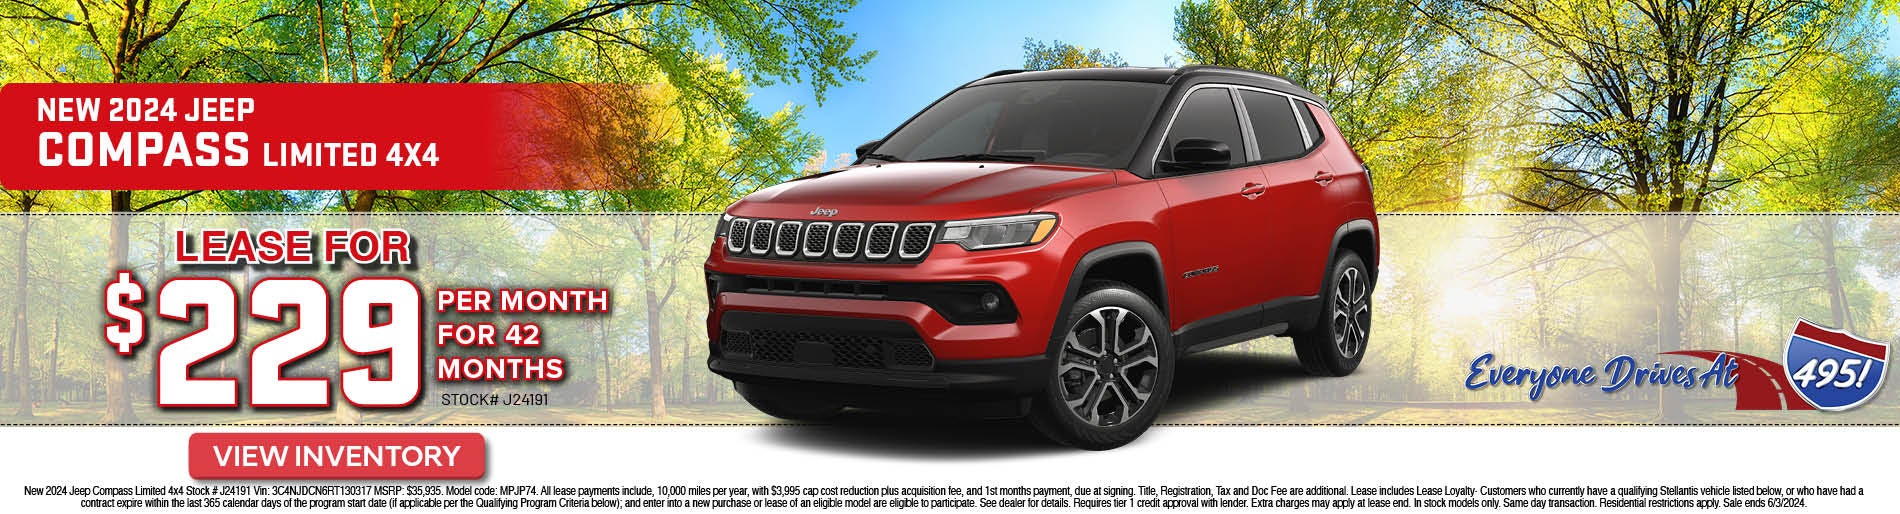 2024 jeep compass limited 